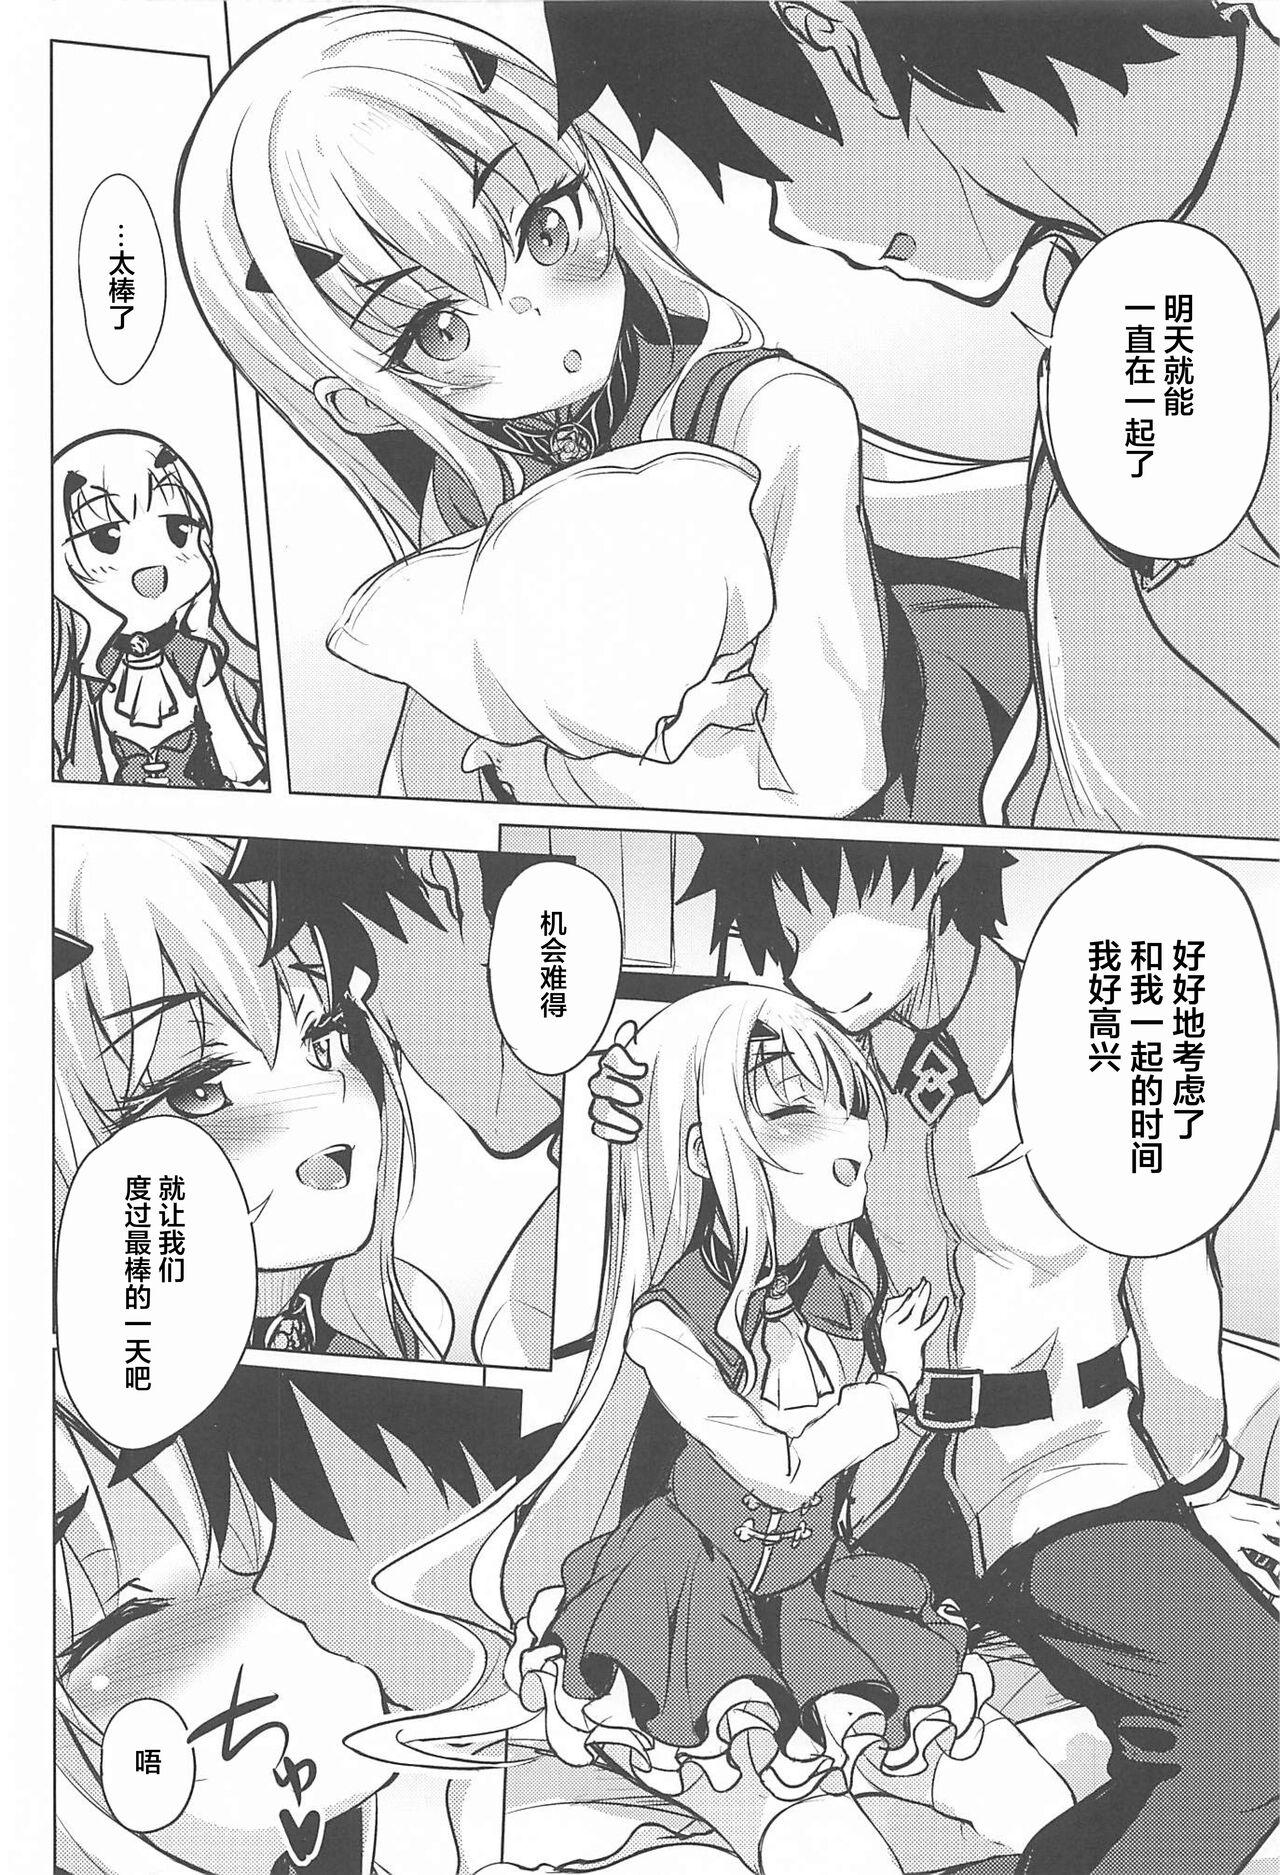 Hardcore Porn 休暇日和のメリュジーヌ - Fate grand order Que - Page 4